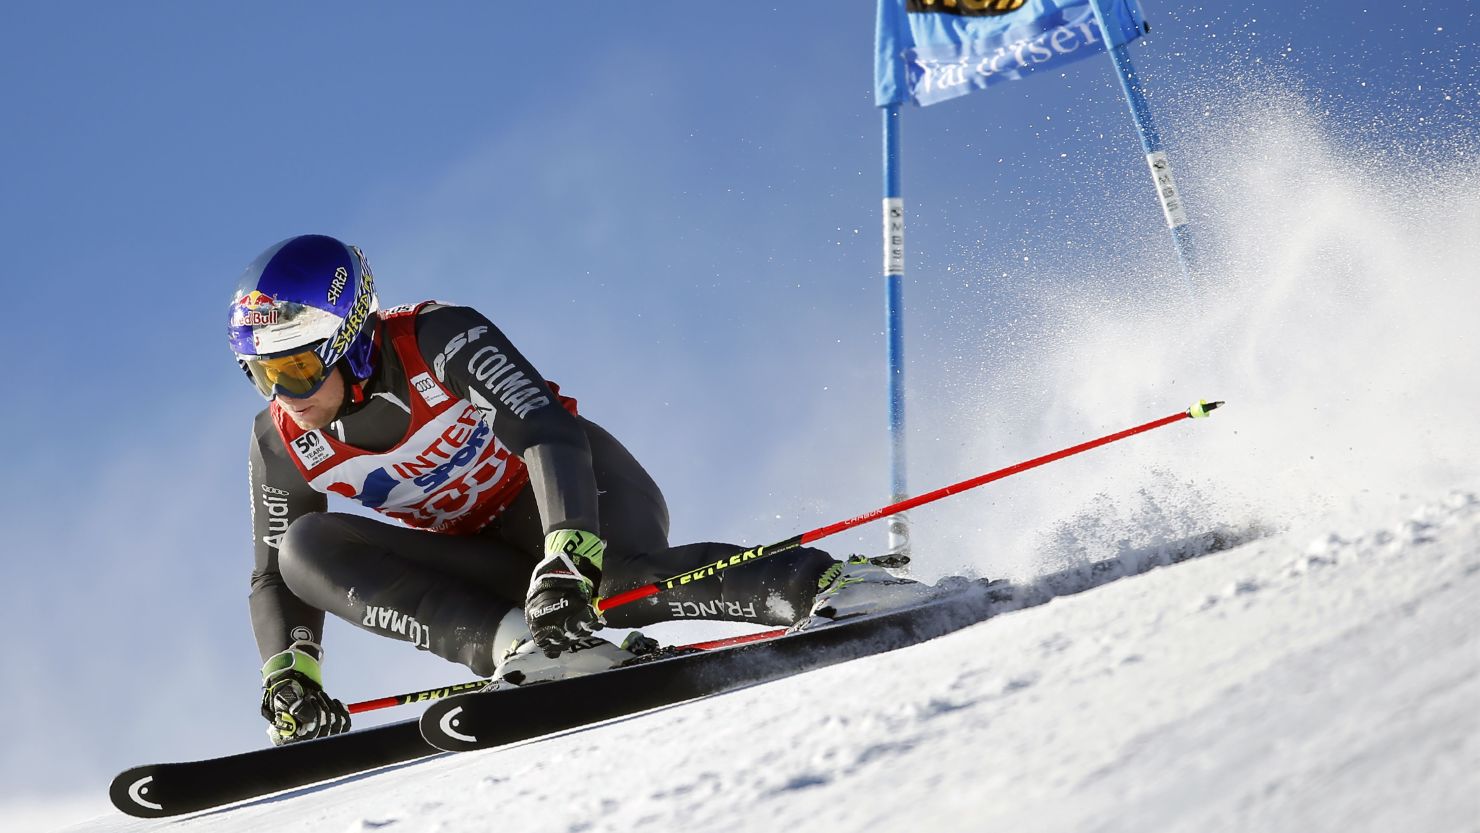 France's Alexis Pinturault wins the men's giant slalom in Val d'Isere.